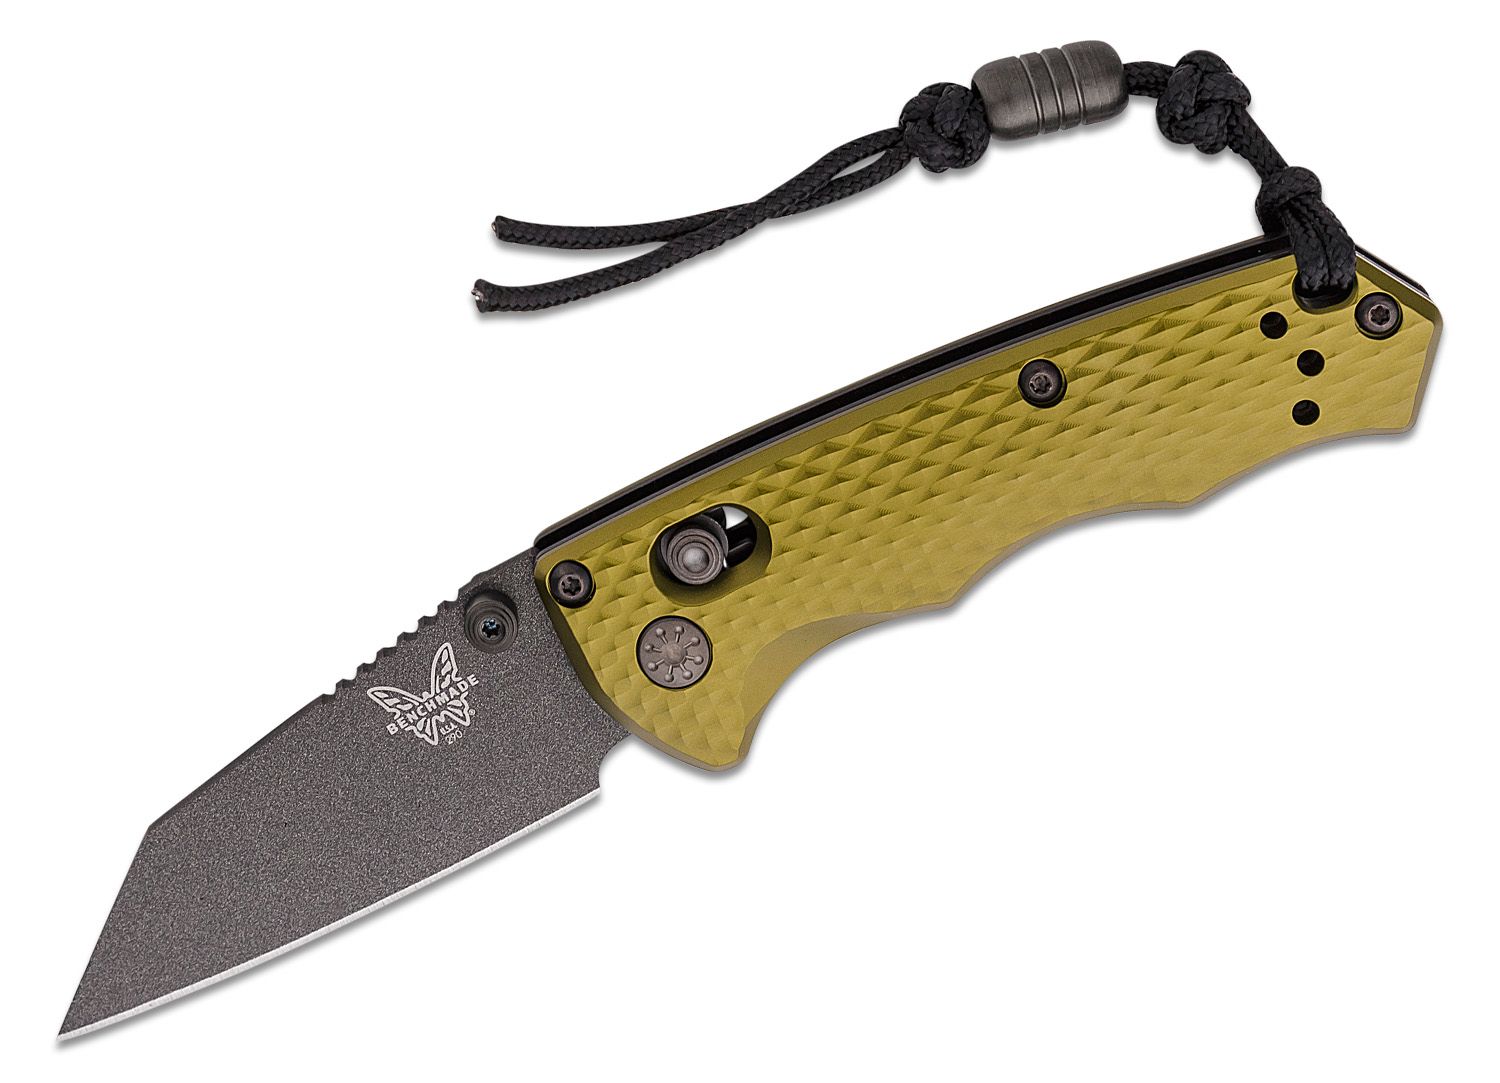 Benchmade Large Malice/MOLLE Clip - KnifeCenter - 983551F - Discontinued